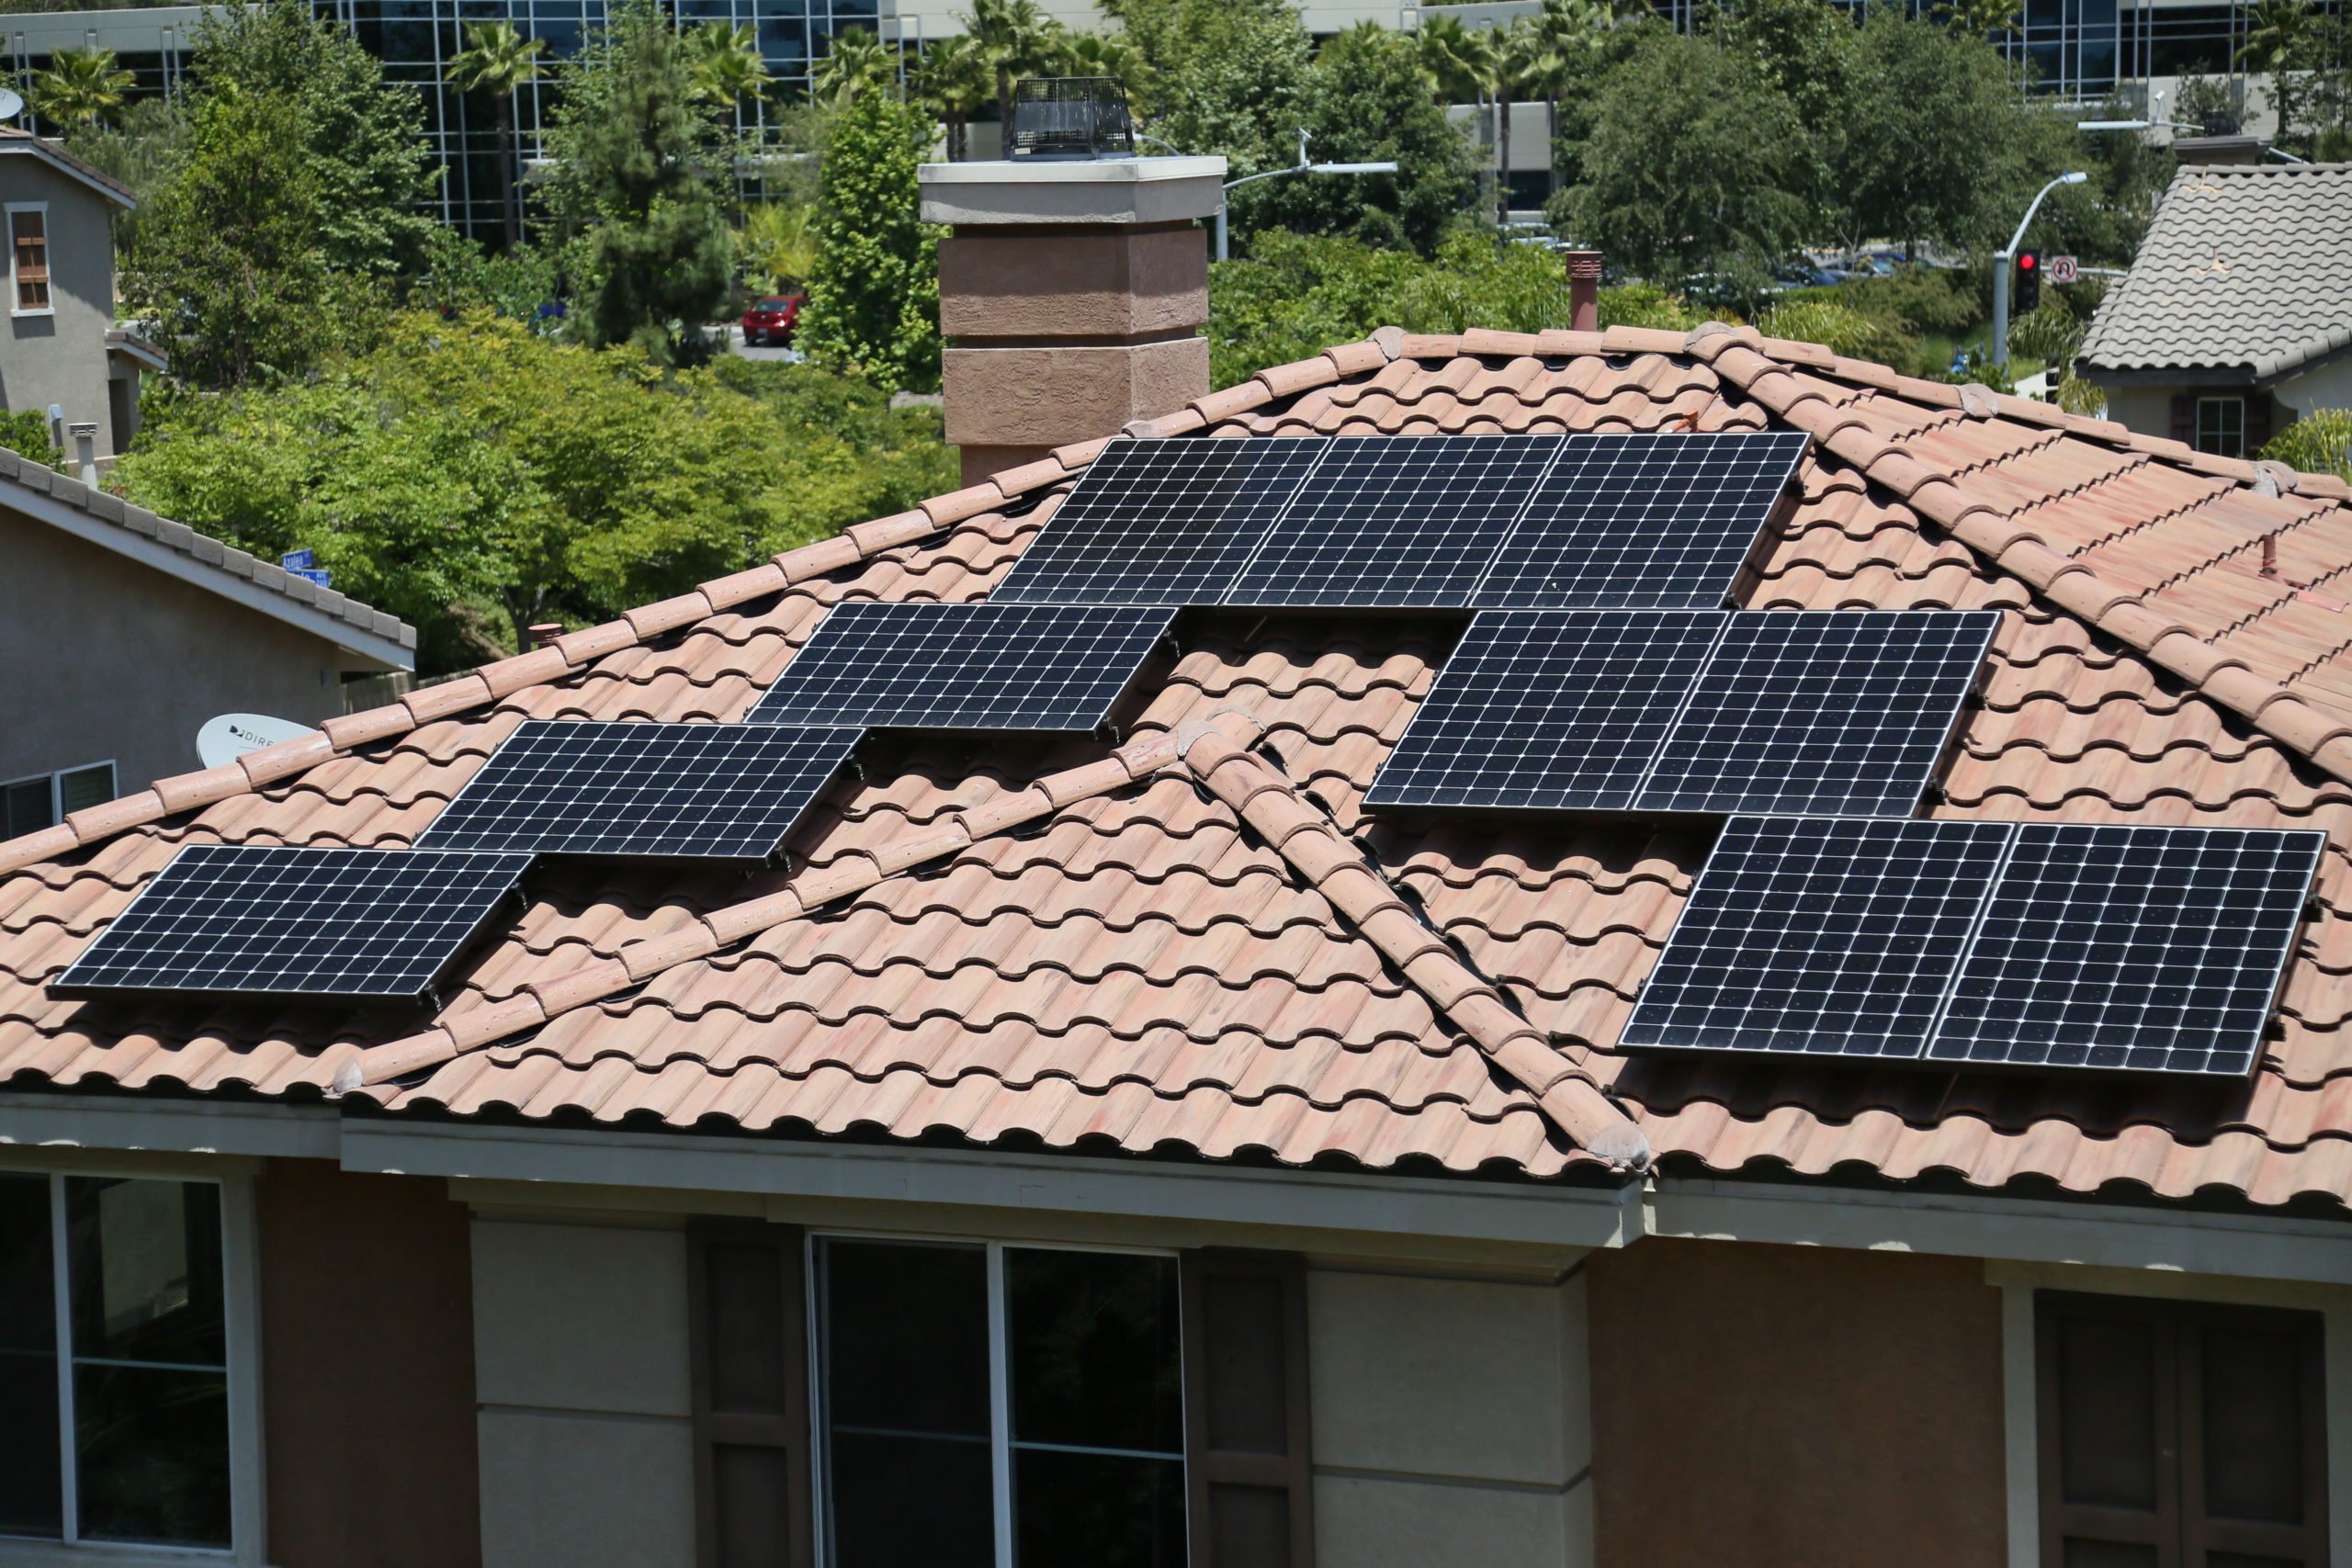 How Many Solar Panels Are Needed To Run A House?